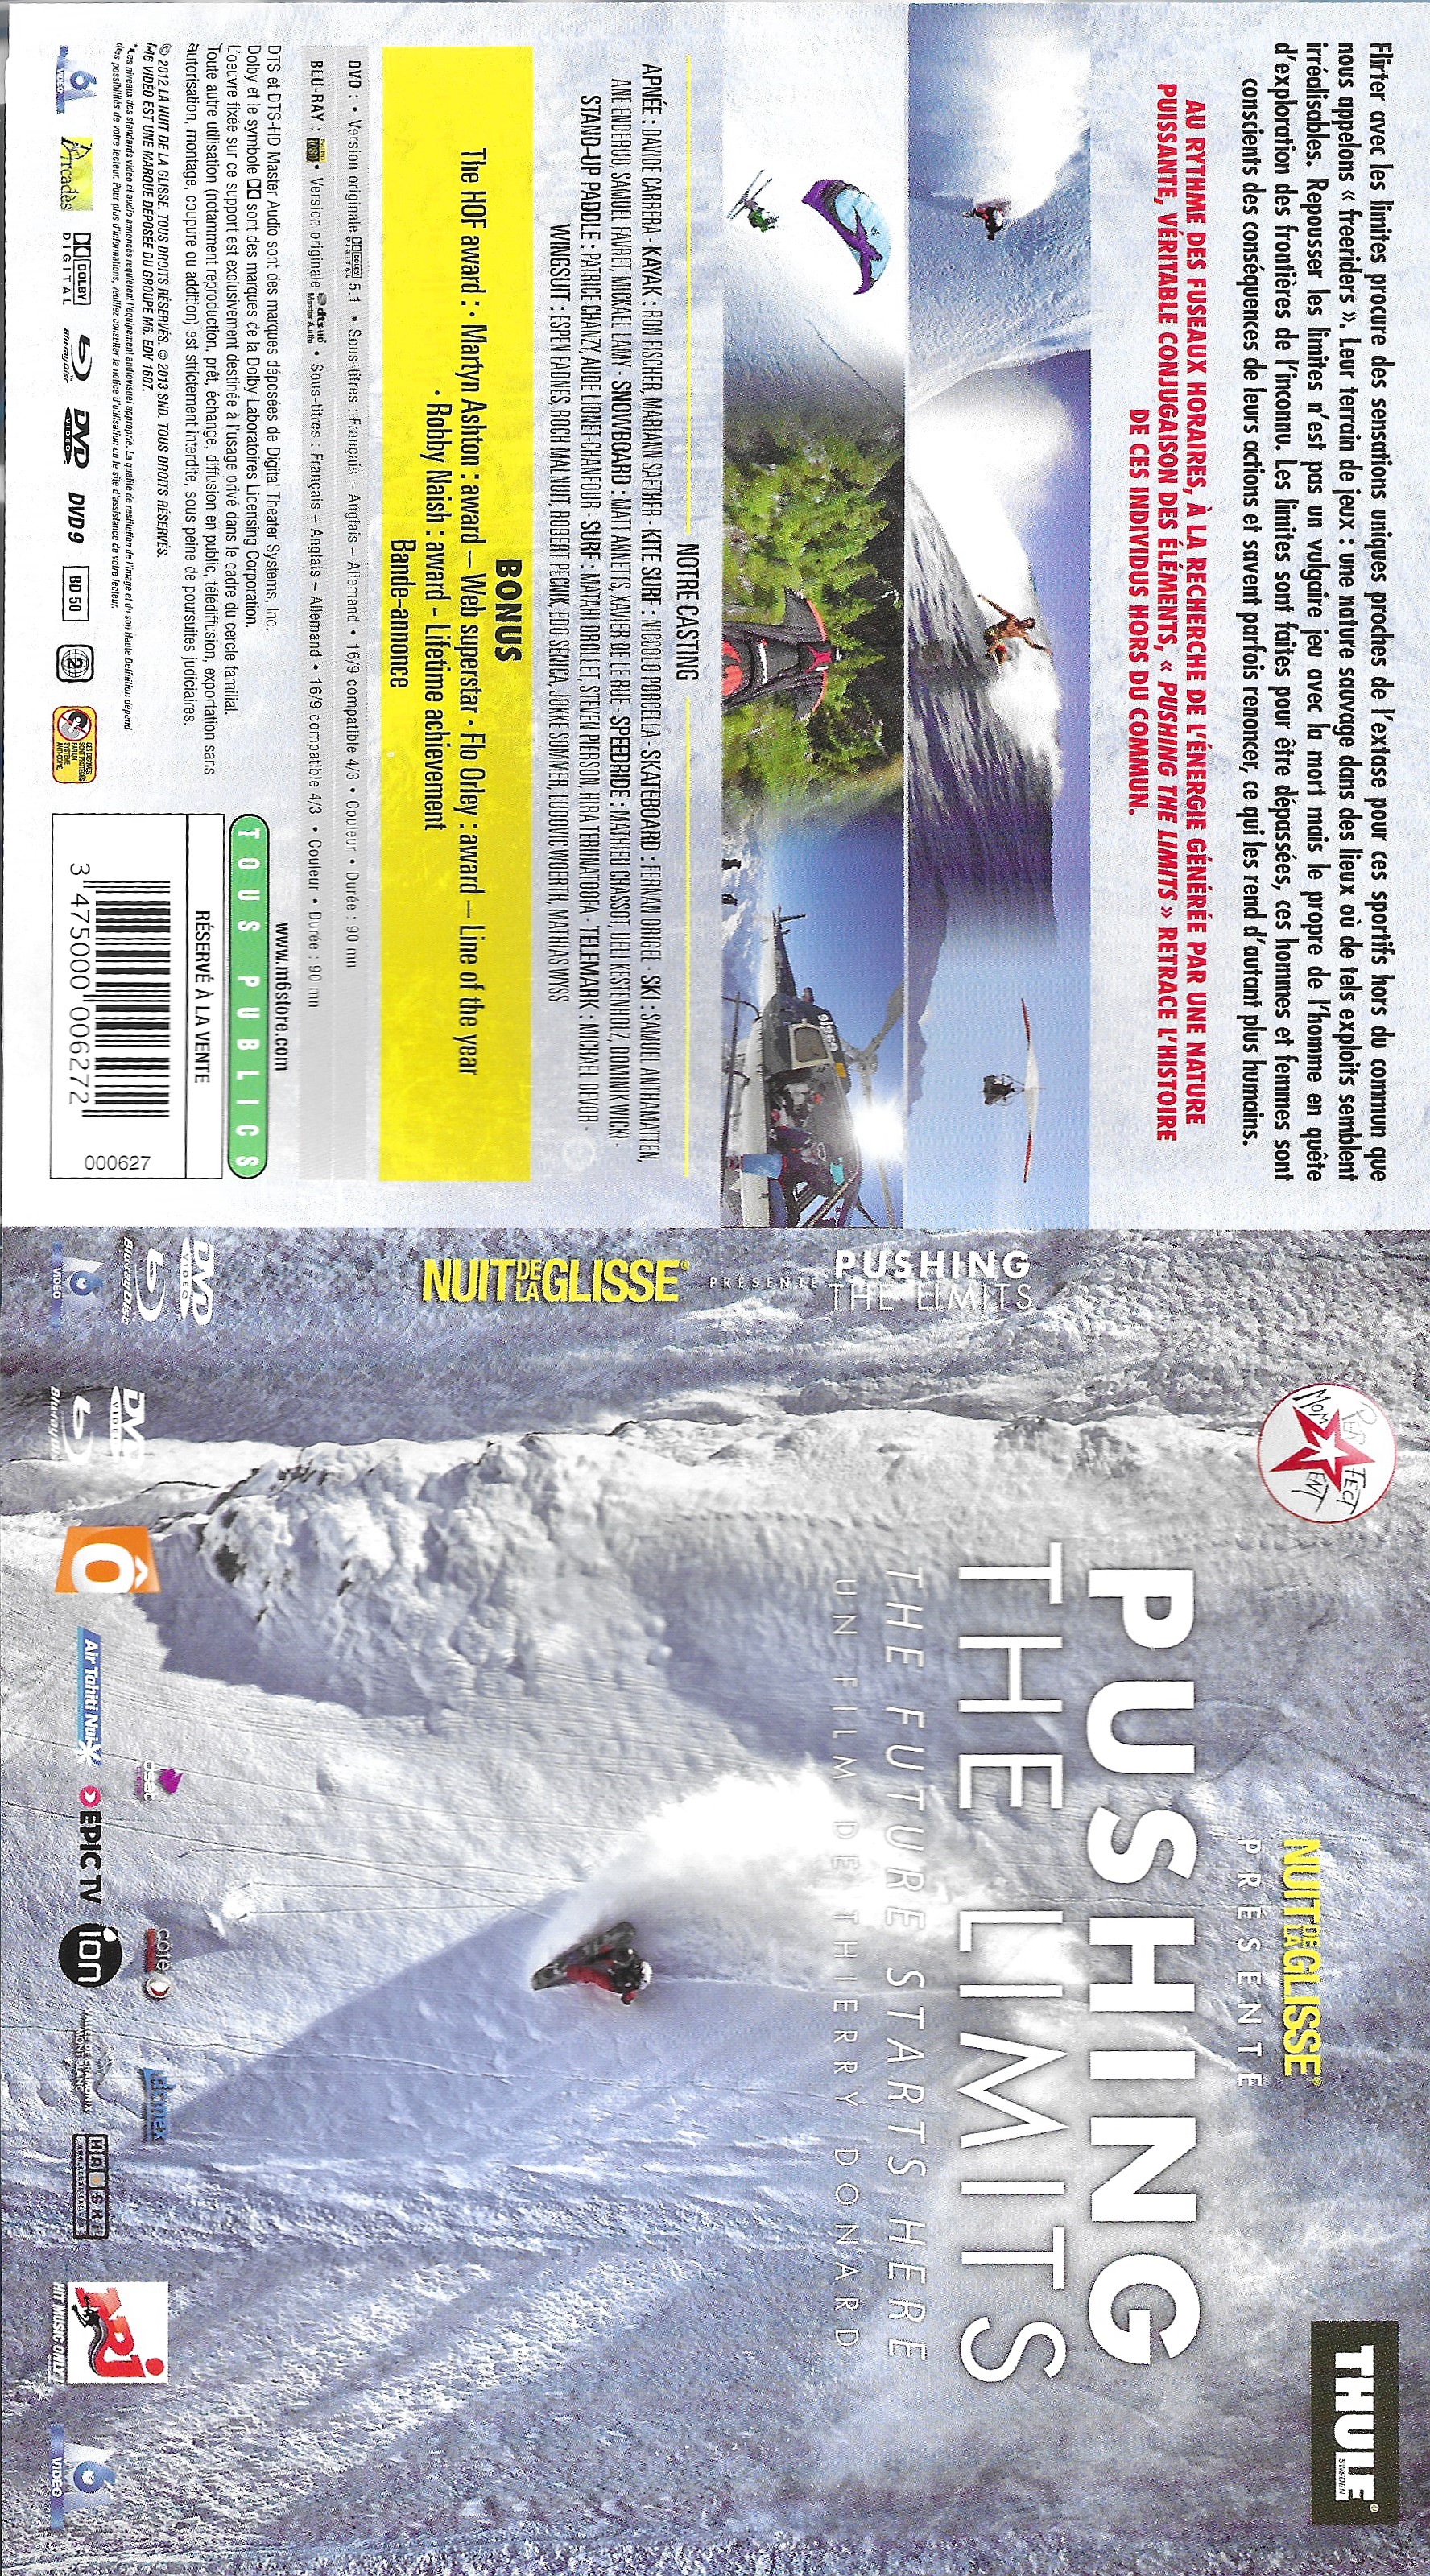 Jaquette DVD Pushing the limits the future starts here (BLU-RAY)